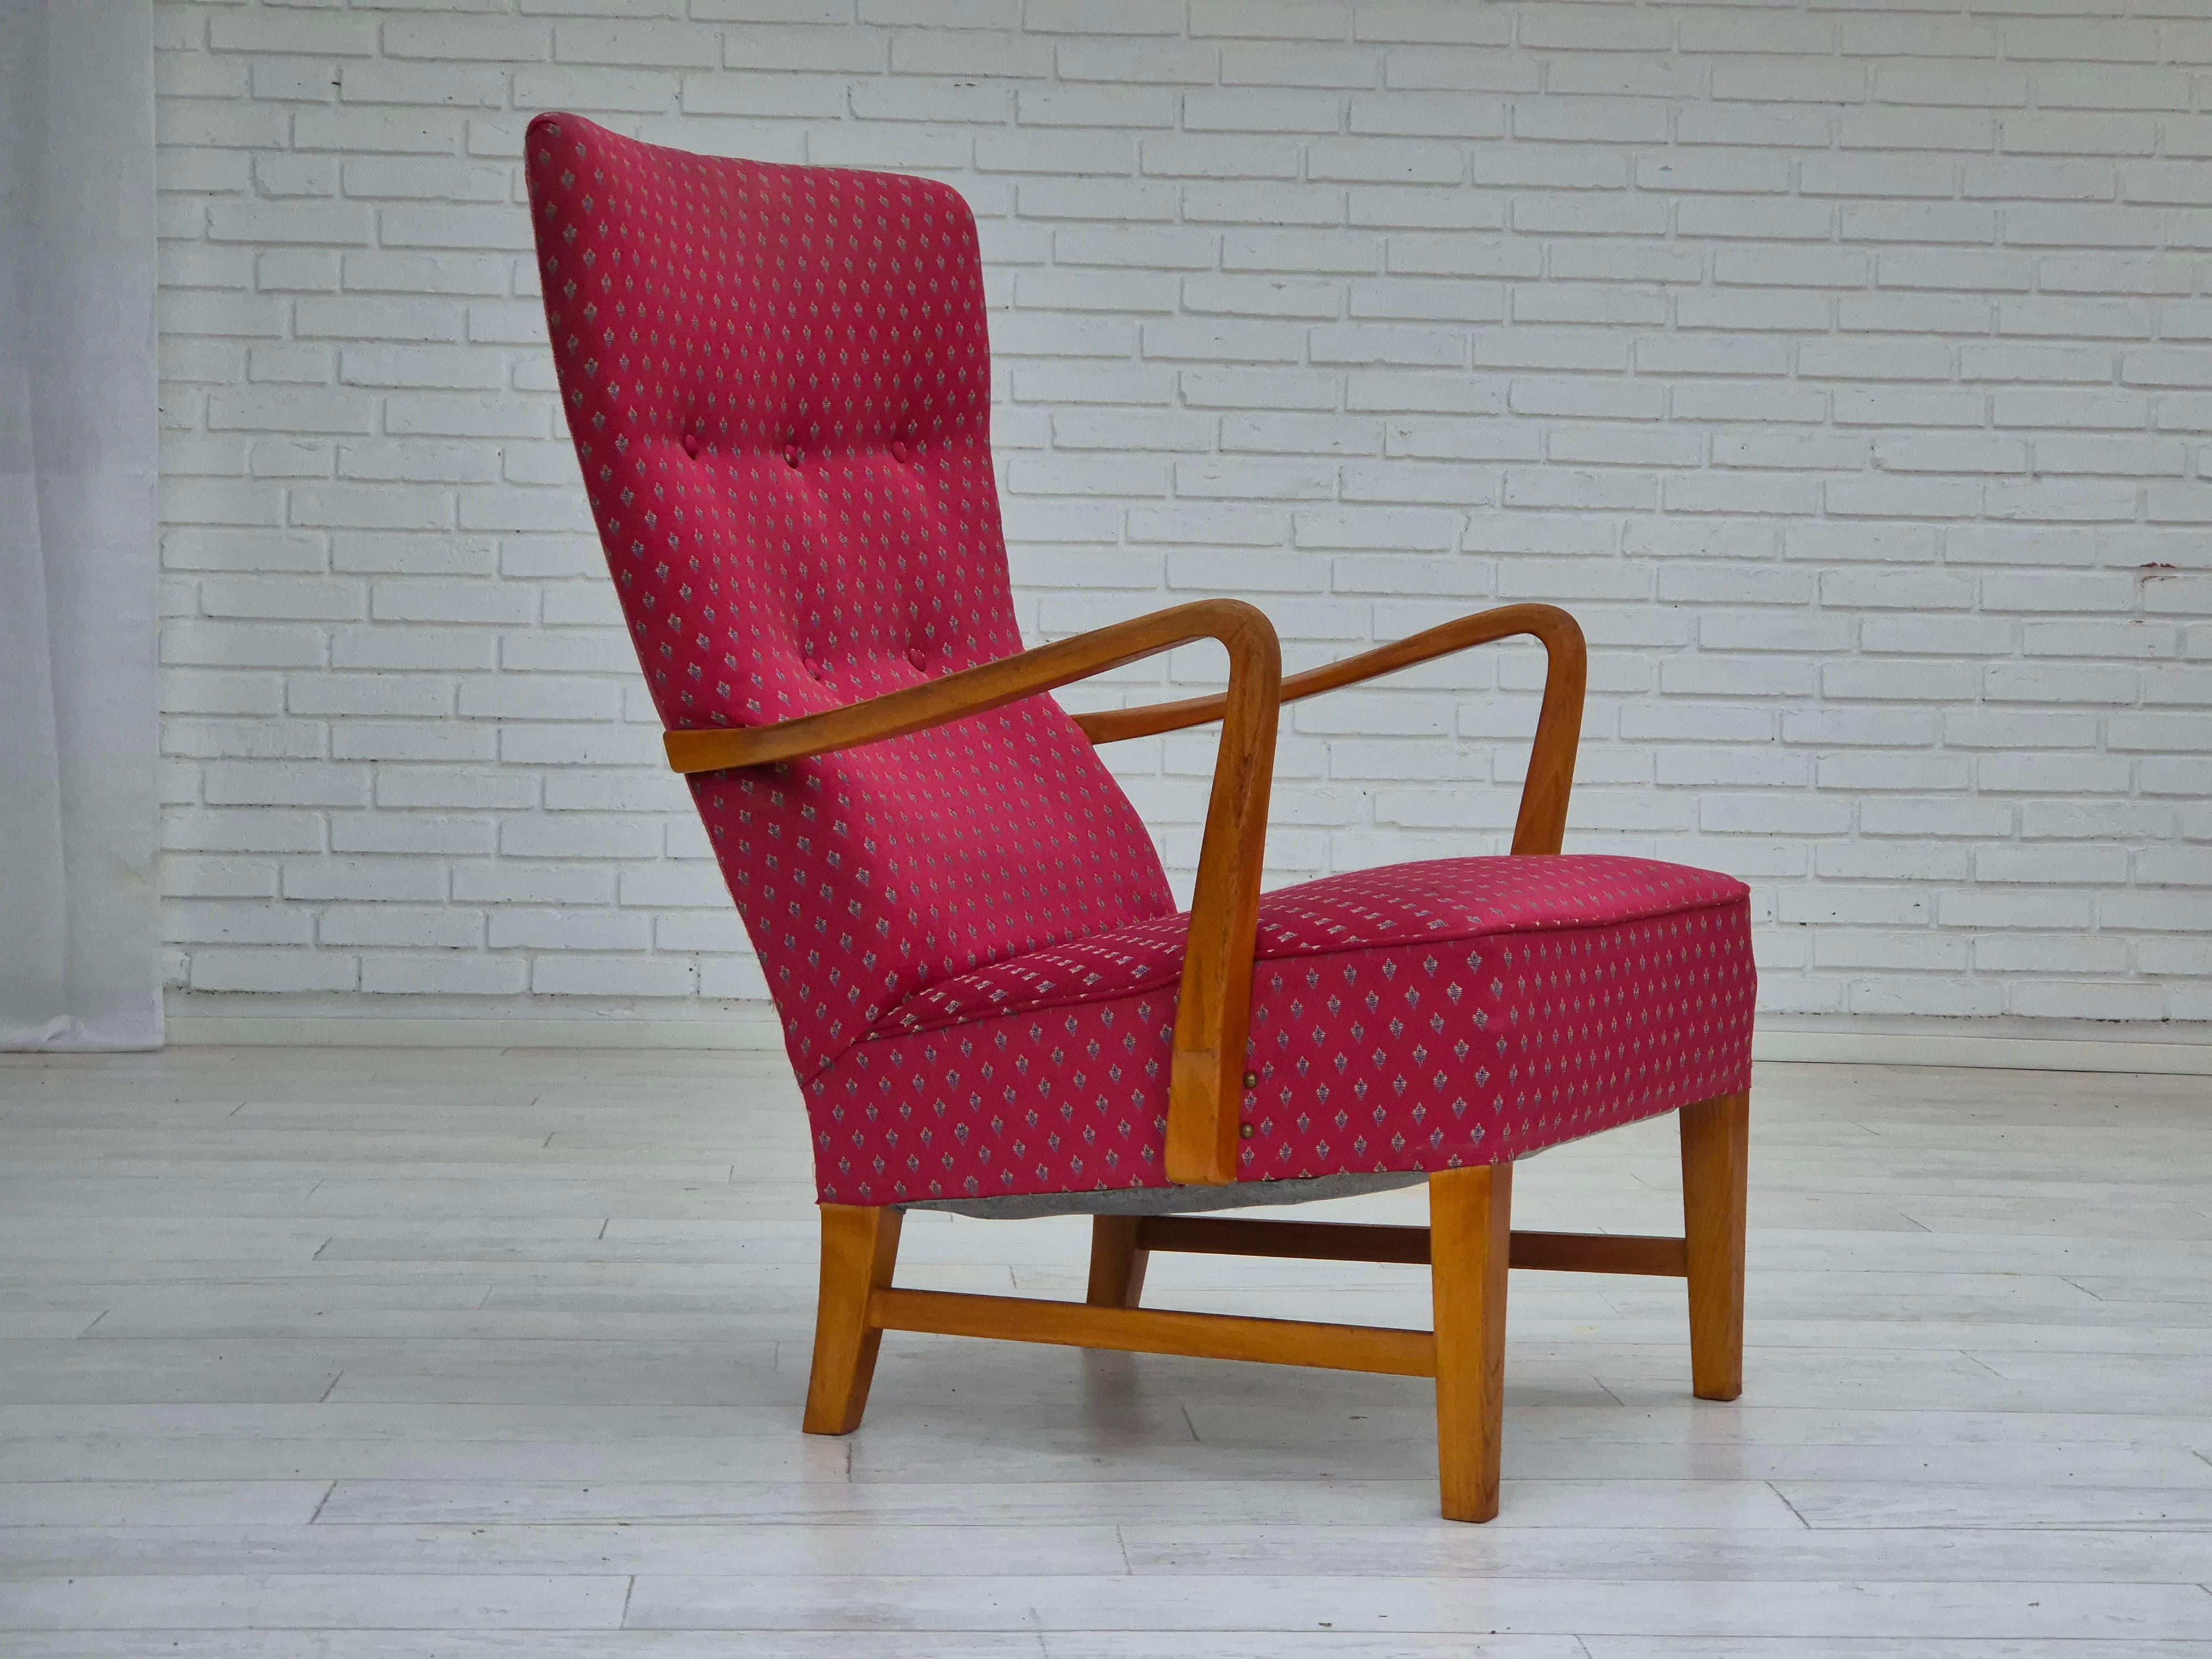 1970s, Scandinavian chairs in original very good condition: no smells and no stains. Light red furniture fabric, ash wood legs and armrests. Springs in the seat. Manufactured by Norwegian furniture manufacturer in about 1970-75s.